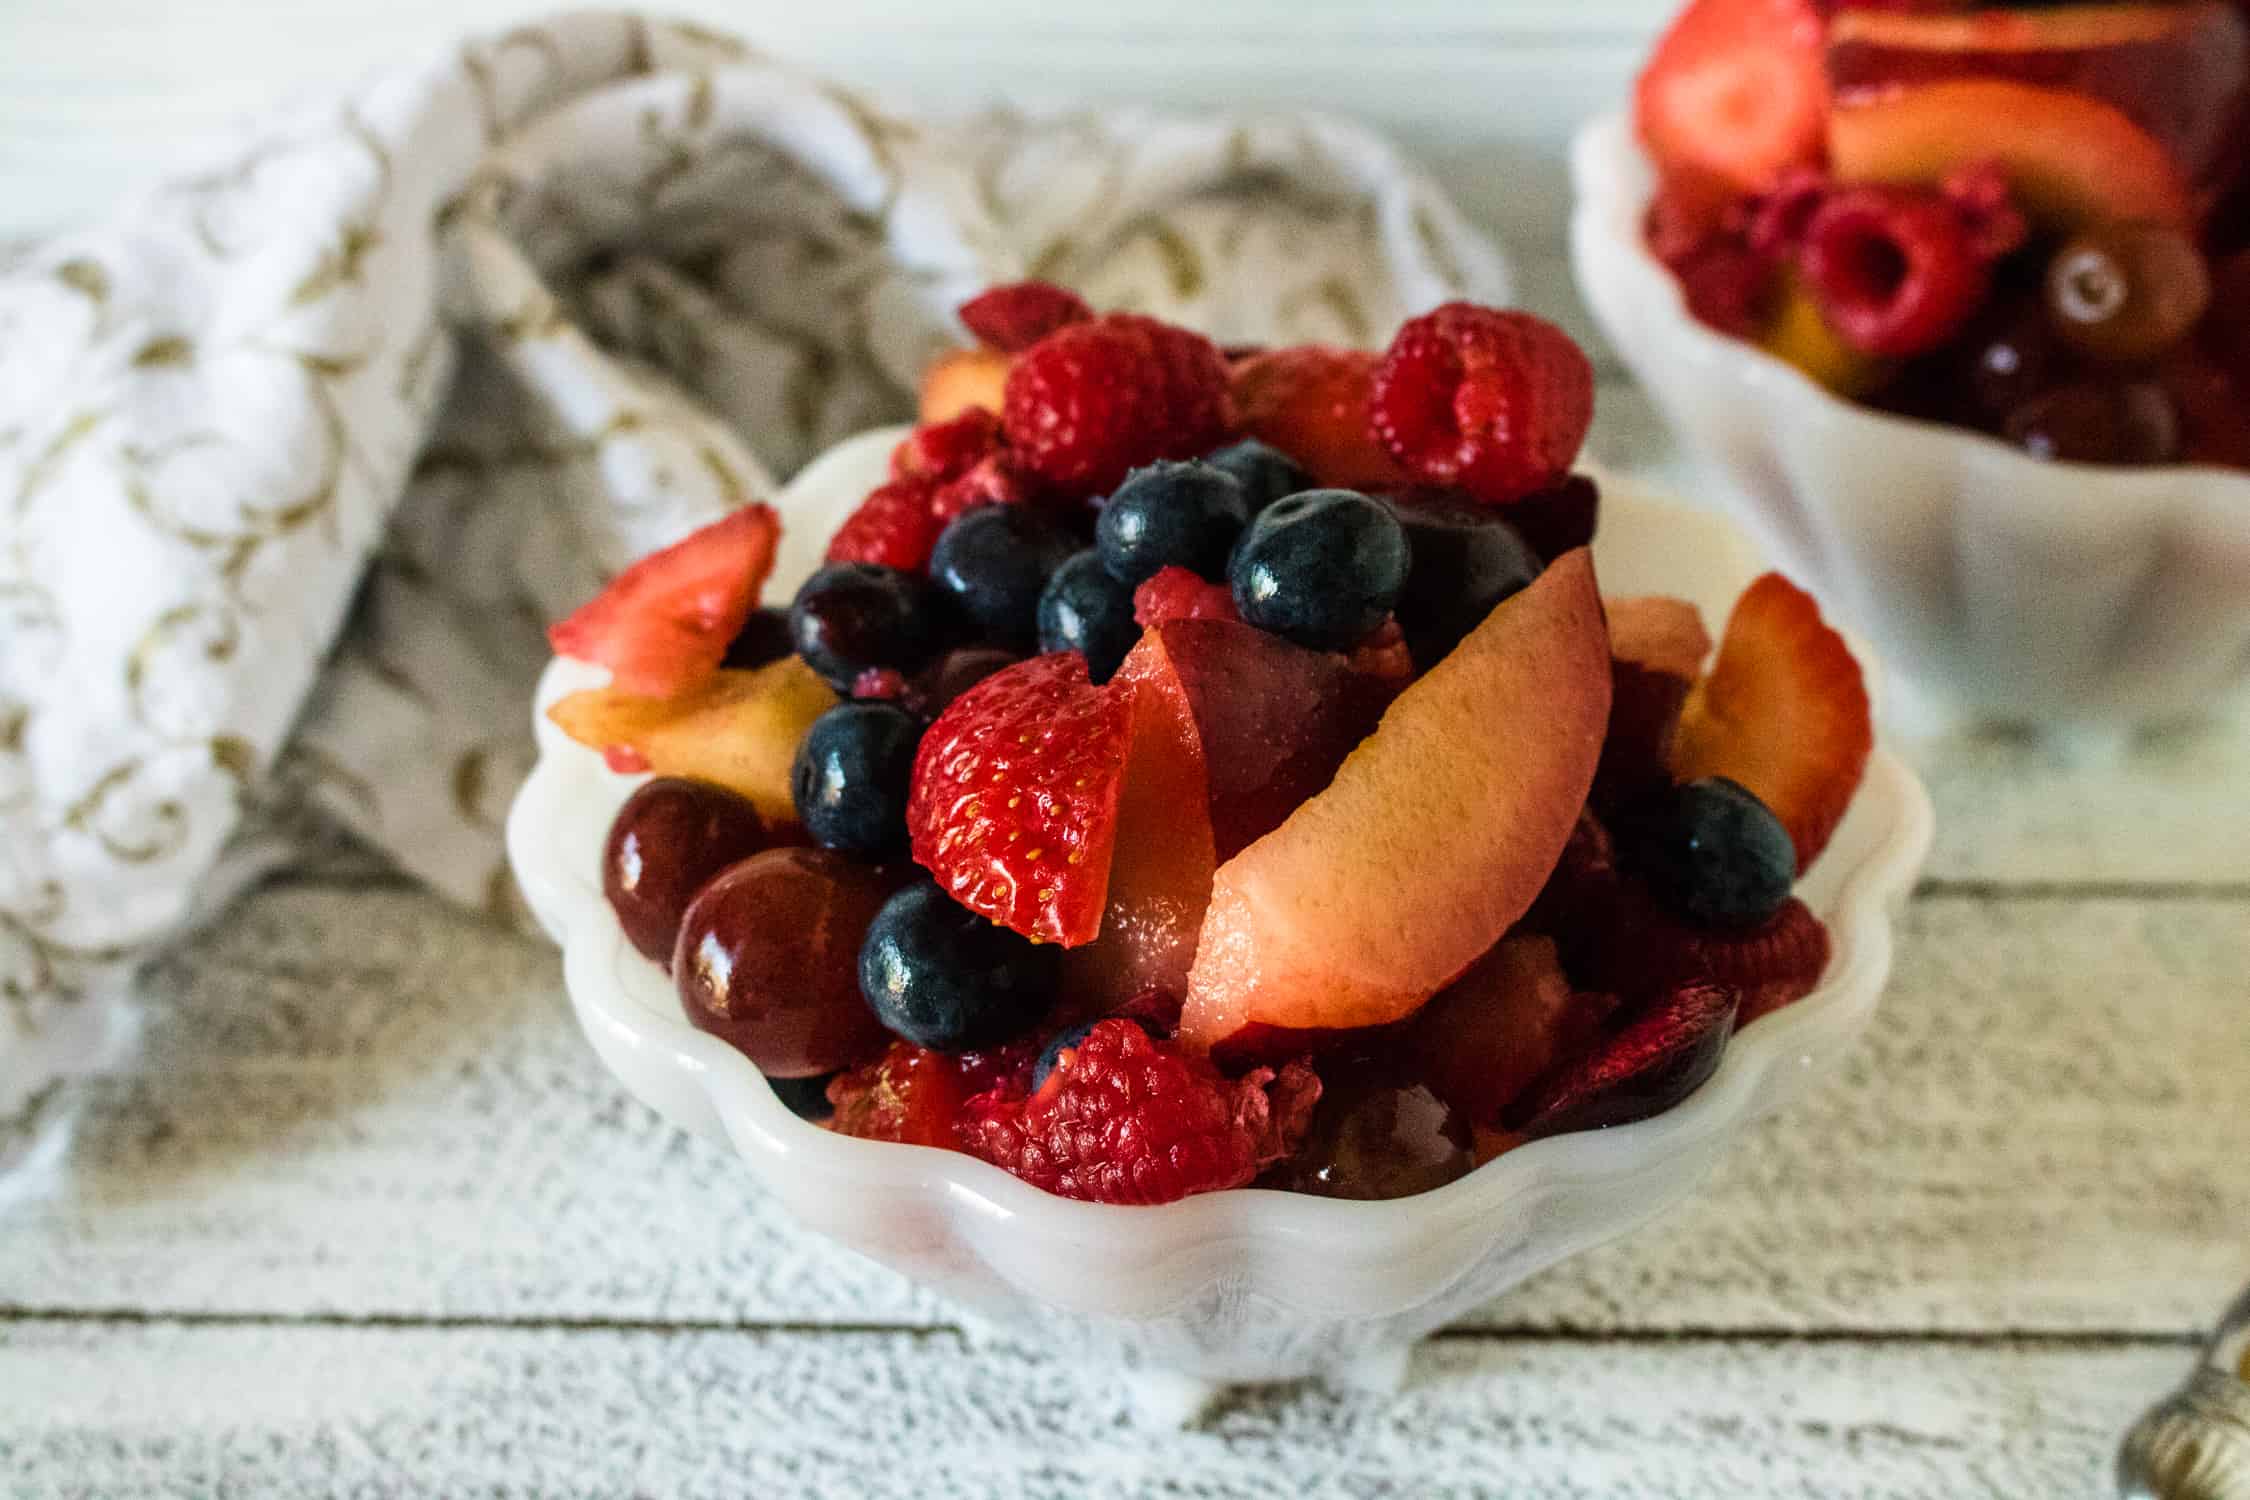 scalloped white bowl with fresh fruit salad with honey lime dressing in it with another identical bowl on background along with white and tan dishtowel